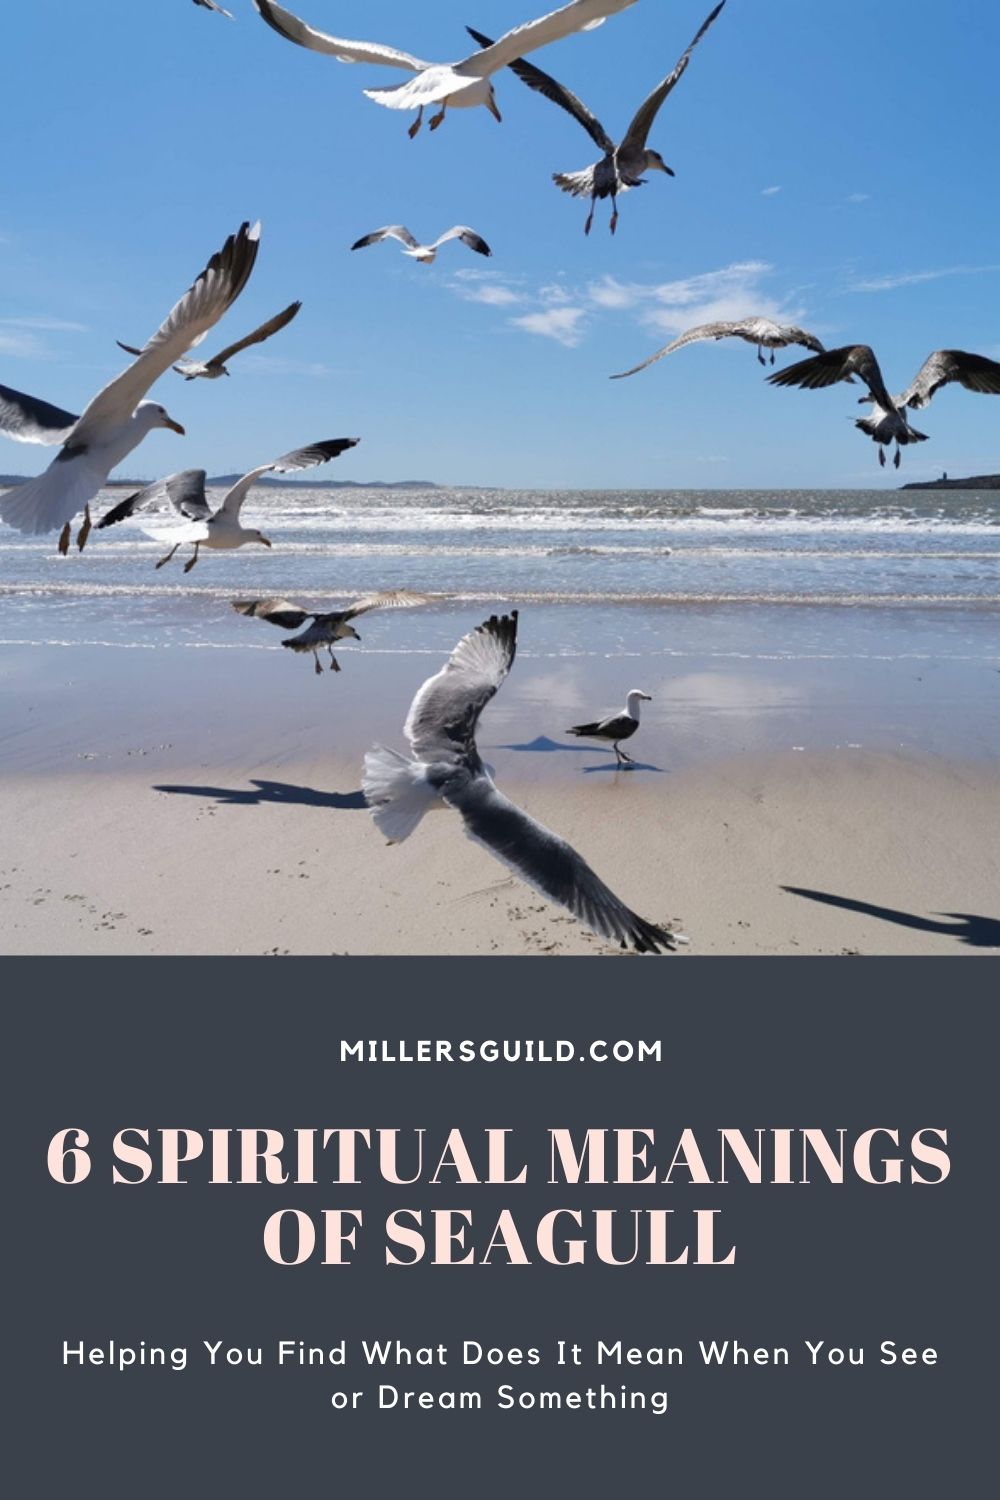 6 Spiritual Meanings of Seagull